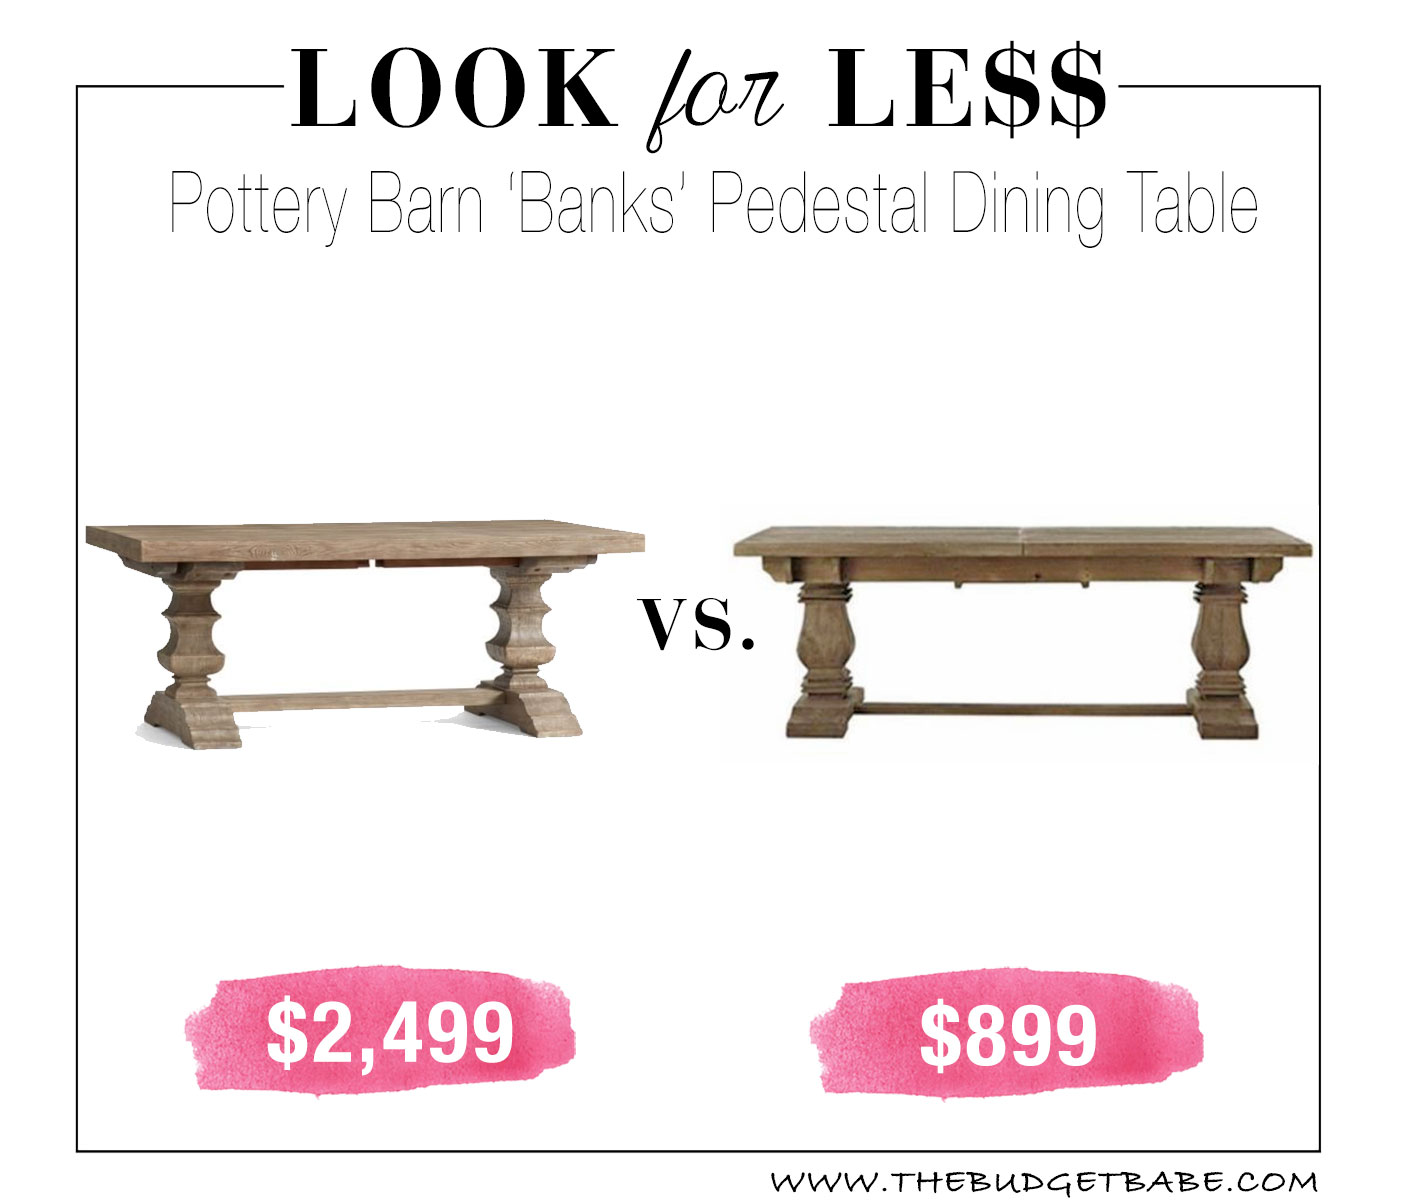 Look for Less: Pottery Barn 'Banks' Pedestal Dining Table